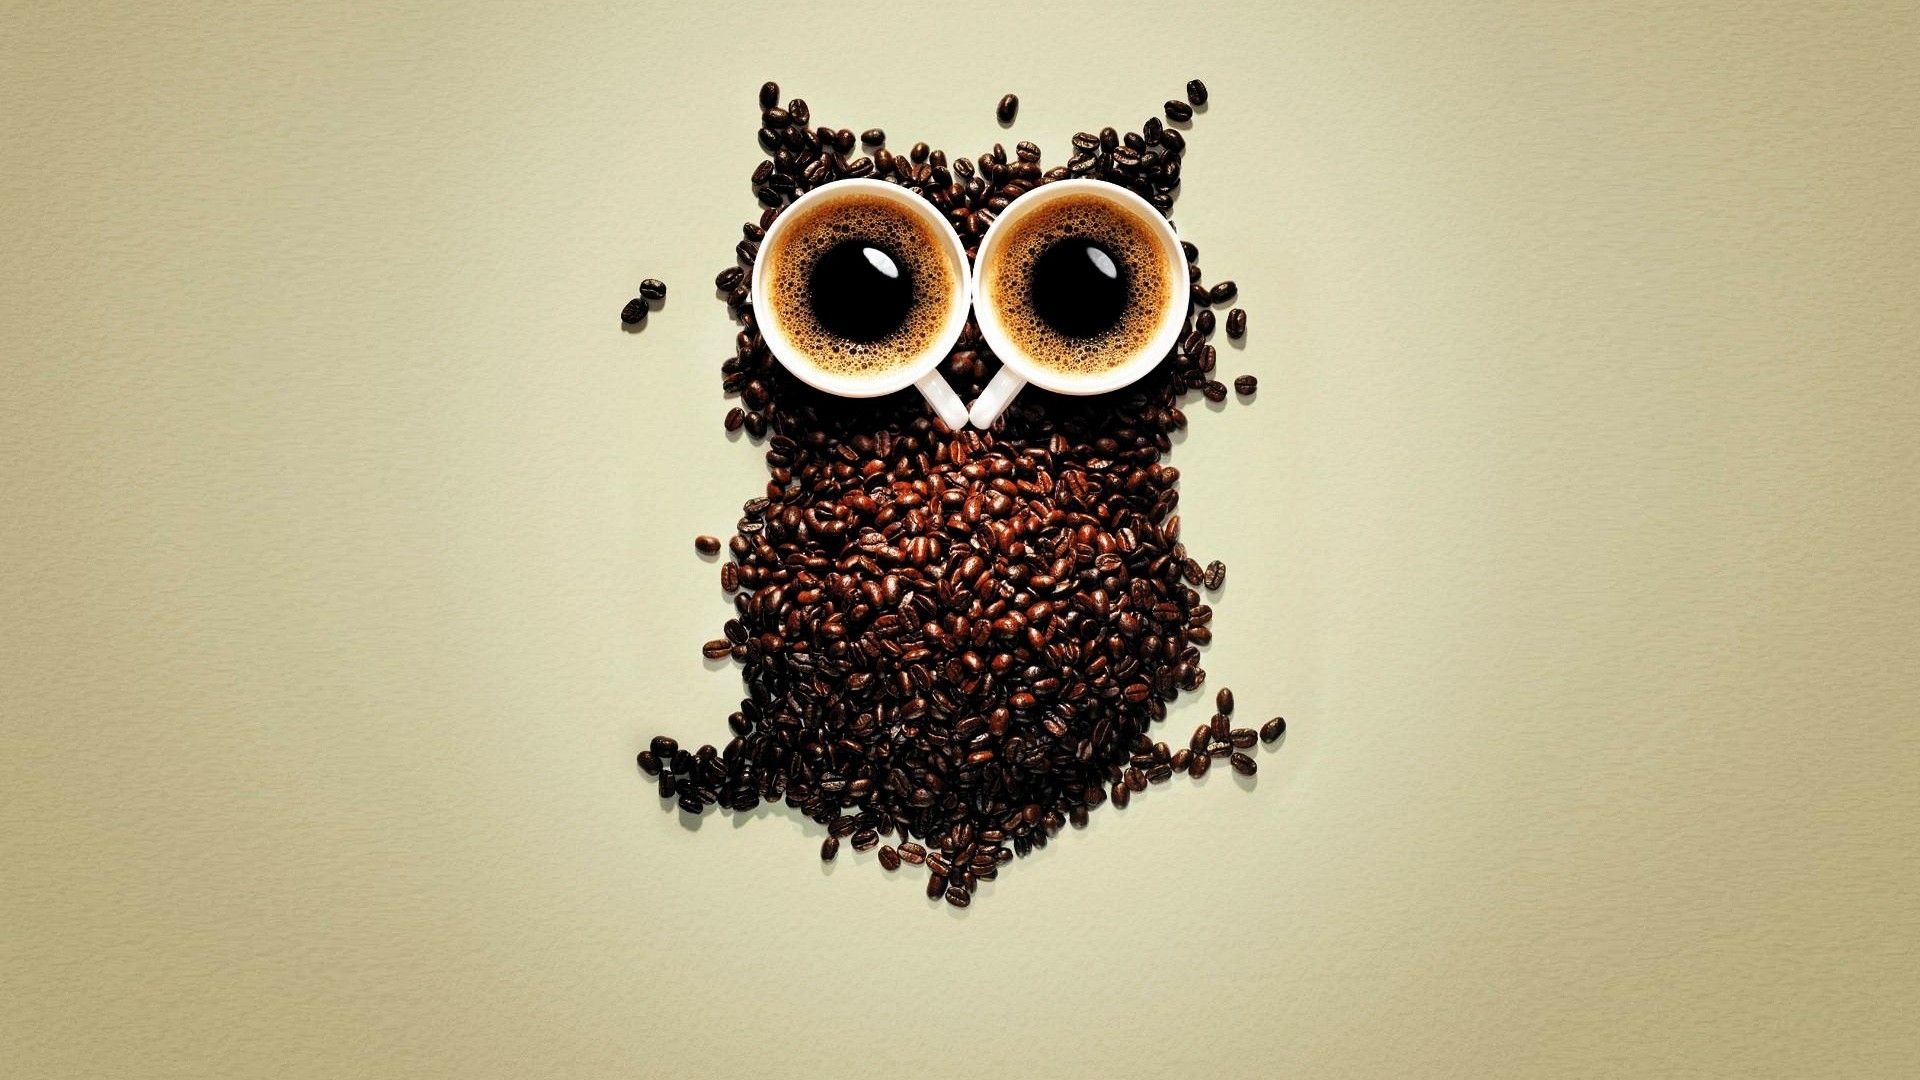 General 1920x1080 coffee coffee beans owl digital art simple background animals abstract food birds cropped